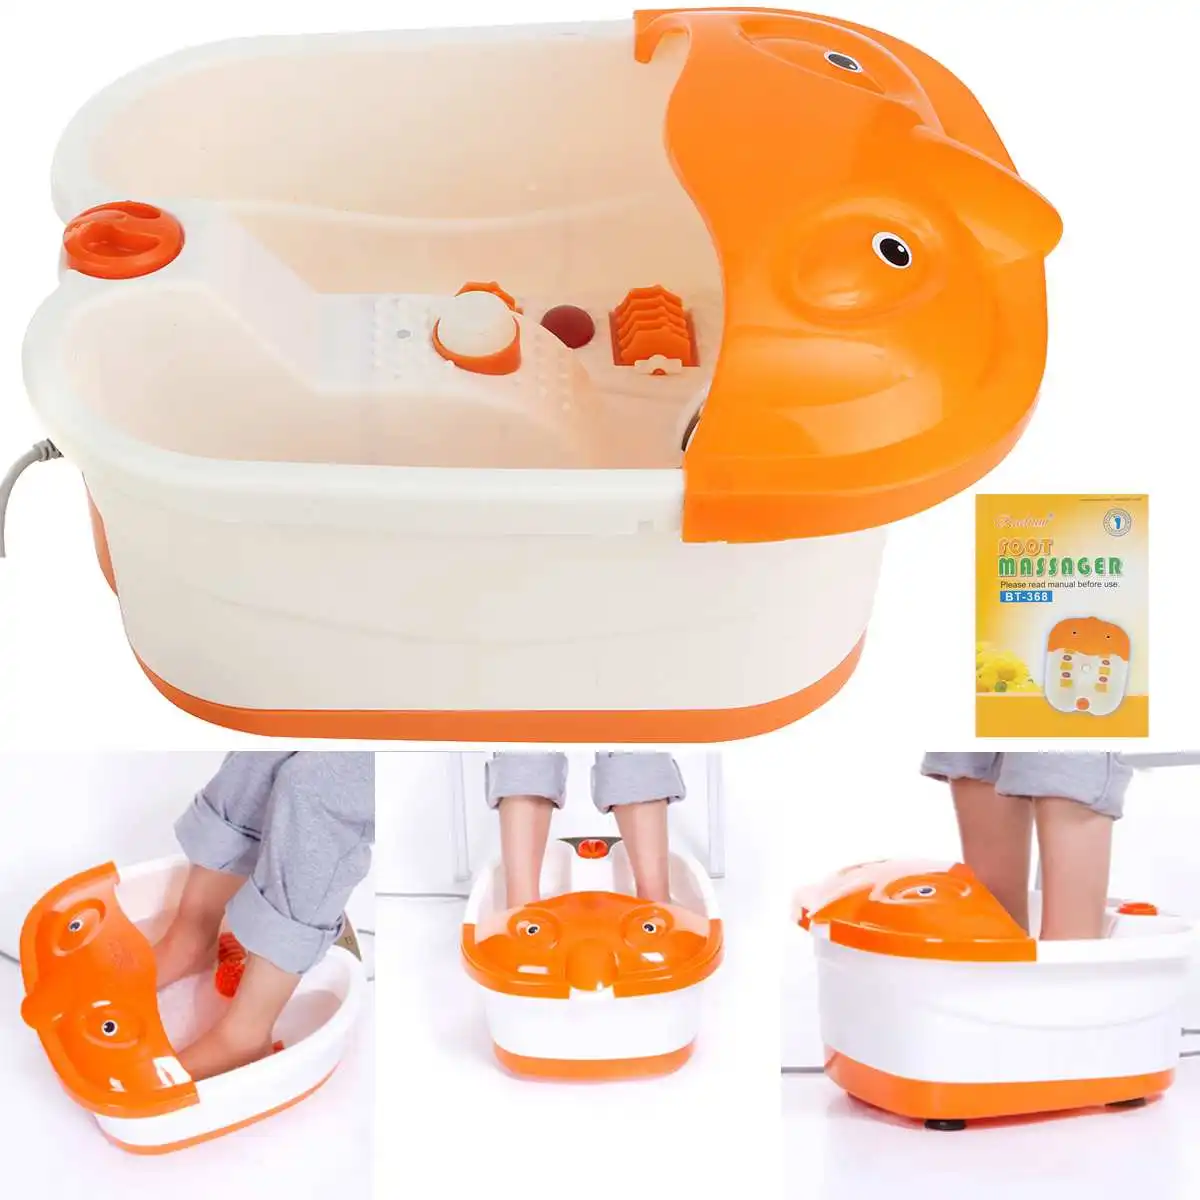 

4.5L Automatic Electric Roller Foot Massage Foot Spa Massager Tub Basin Heat Function Bubbles Massage Relaxation 6 Node Rollers